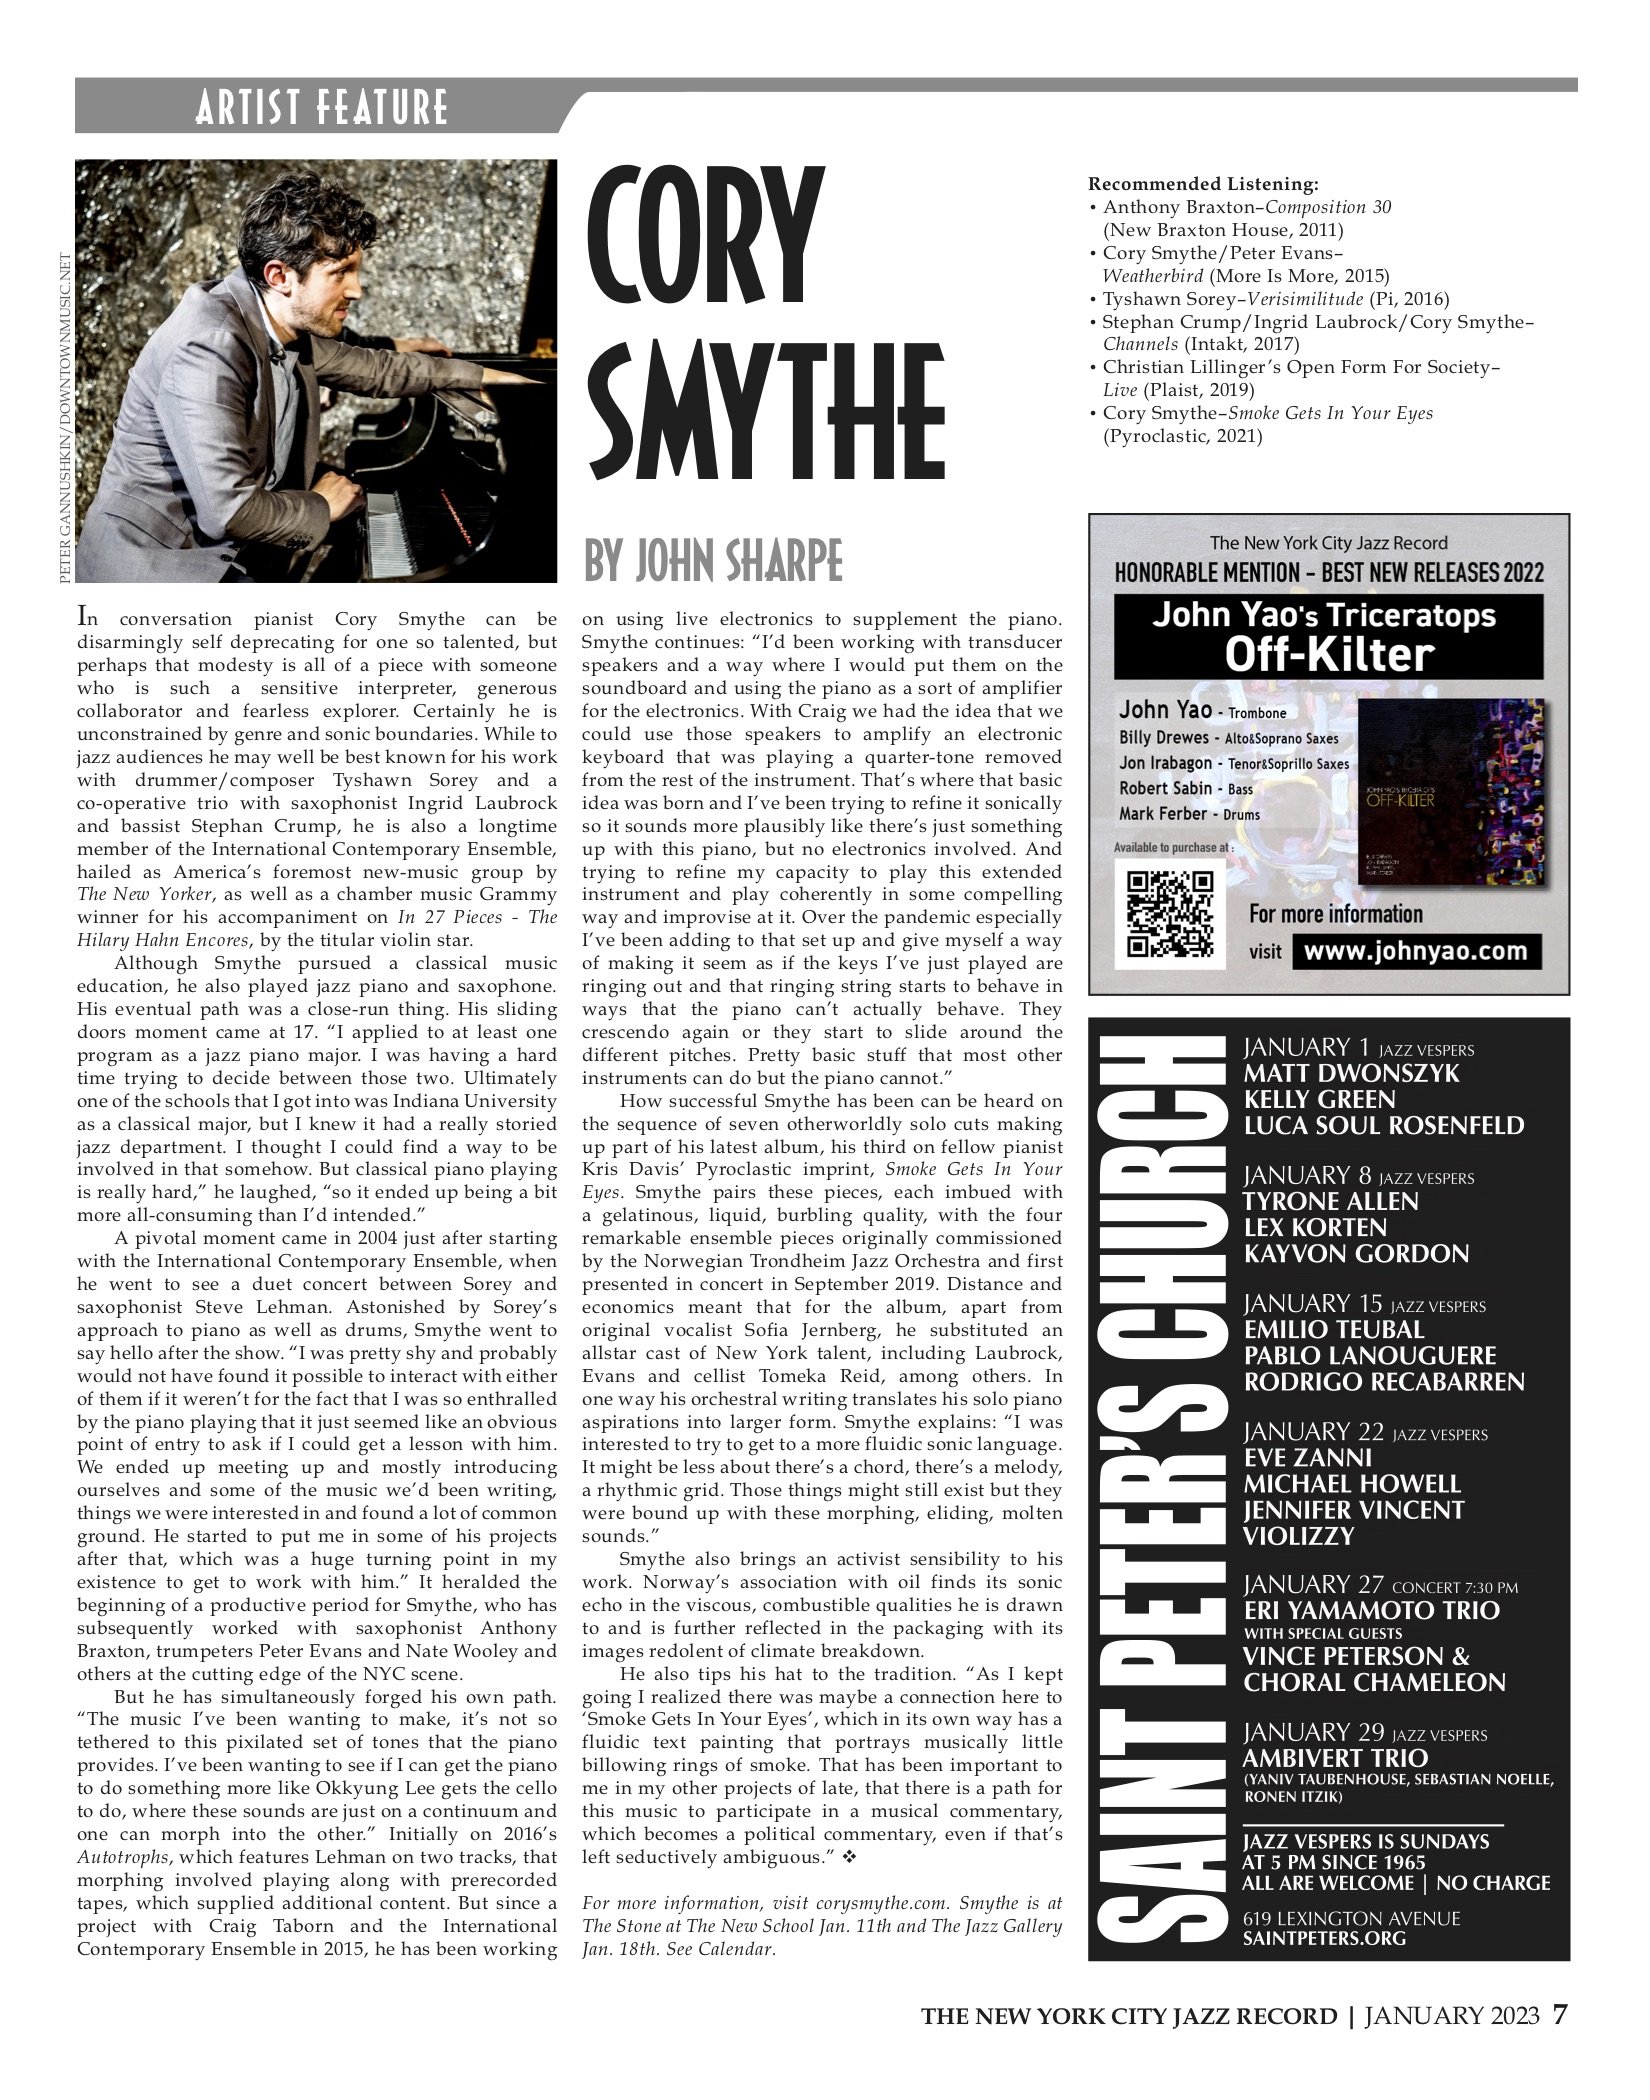 Cory Smythe featured in The New York City Jazz Record